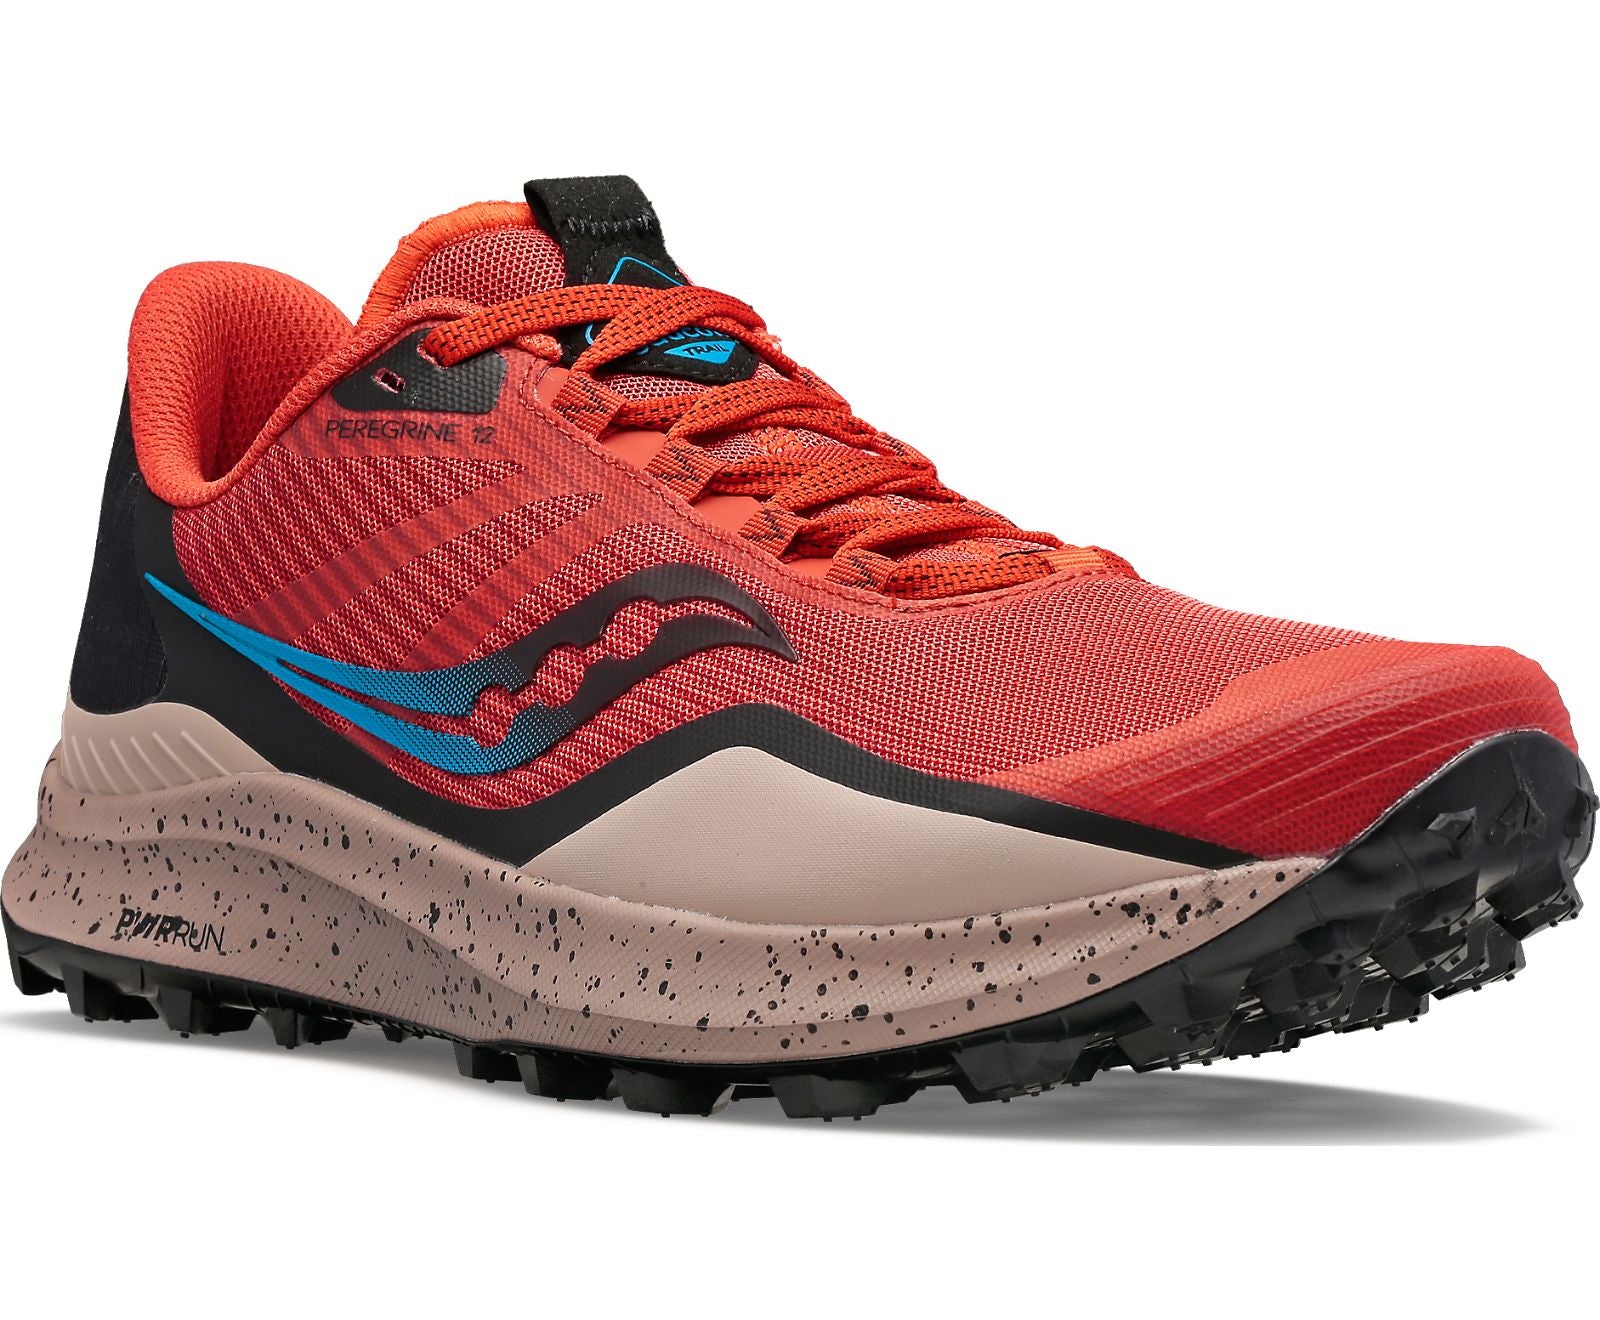 Front angle view of the Men's Peregrine 12 trail shoe by Saucony in the color Clay/Loam